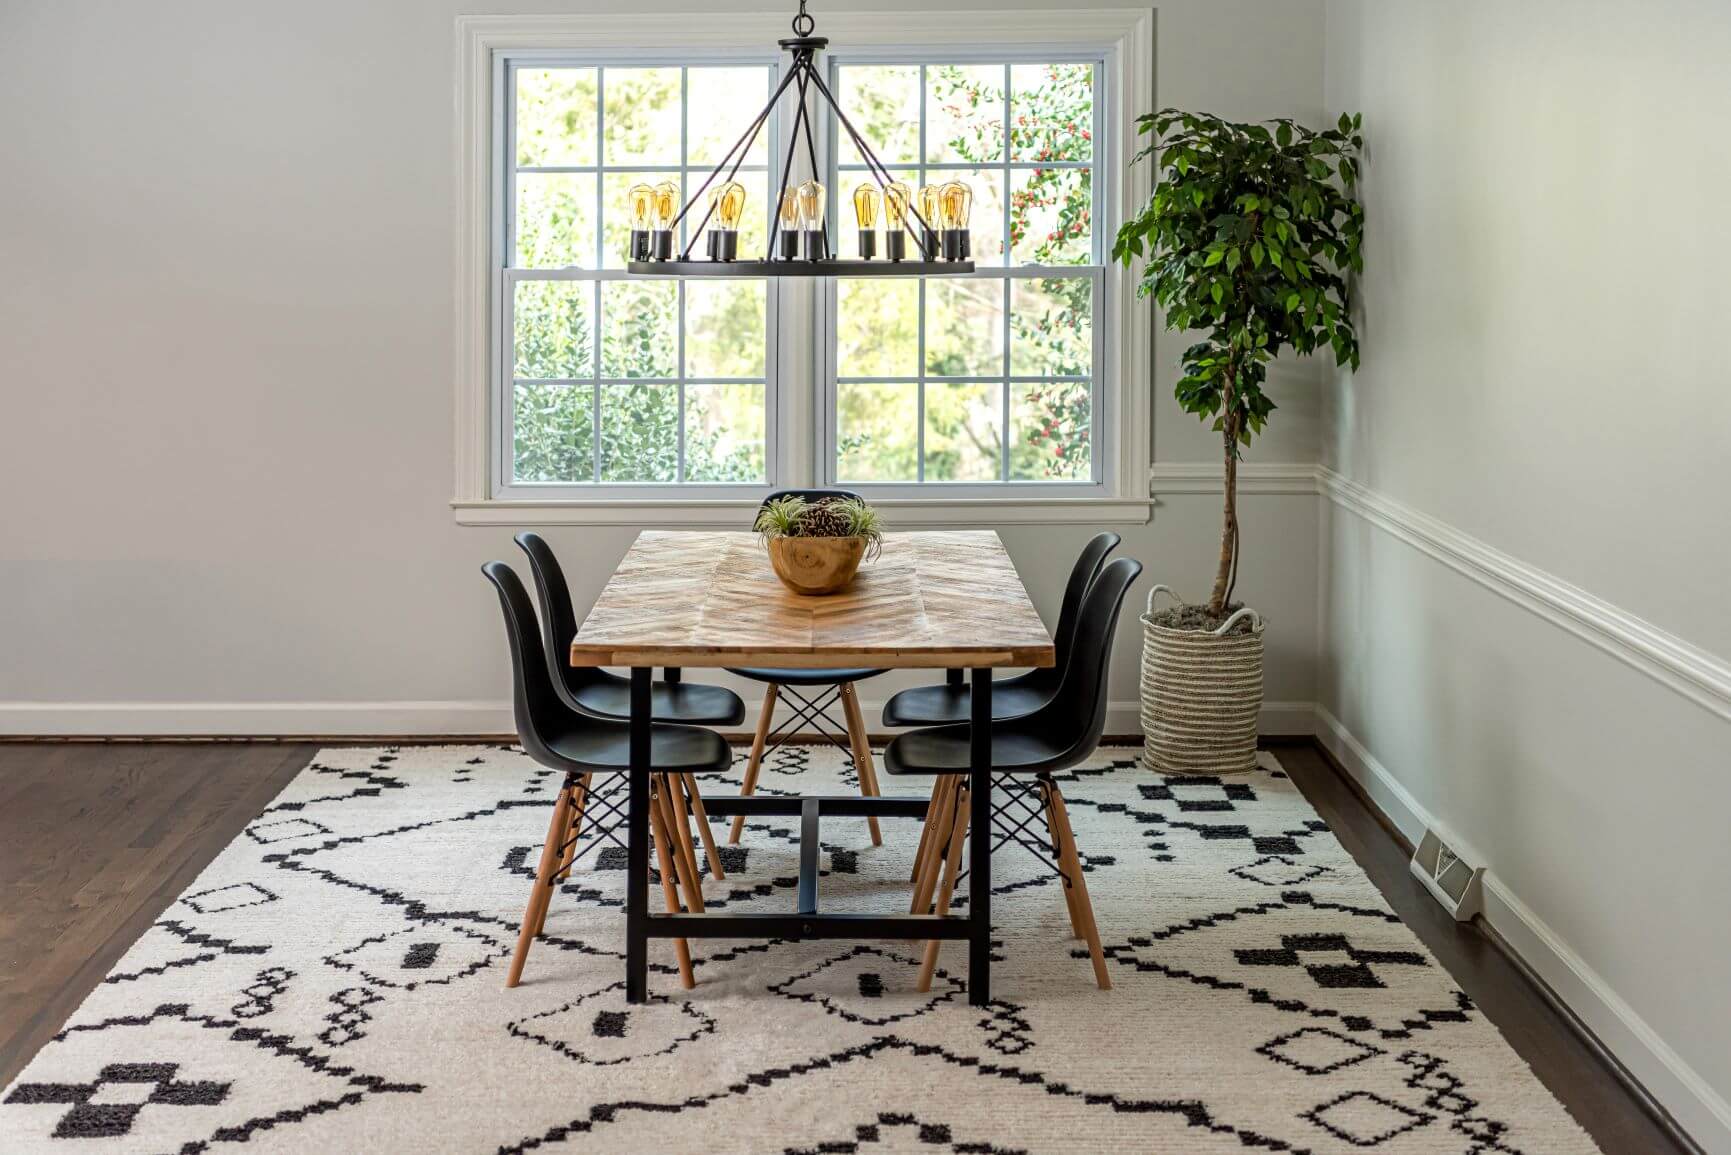 Rug Or No Rug Uner Dining Room Table